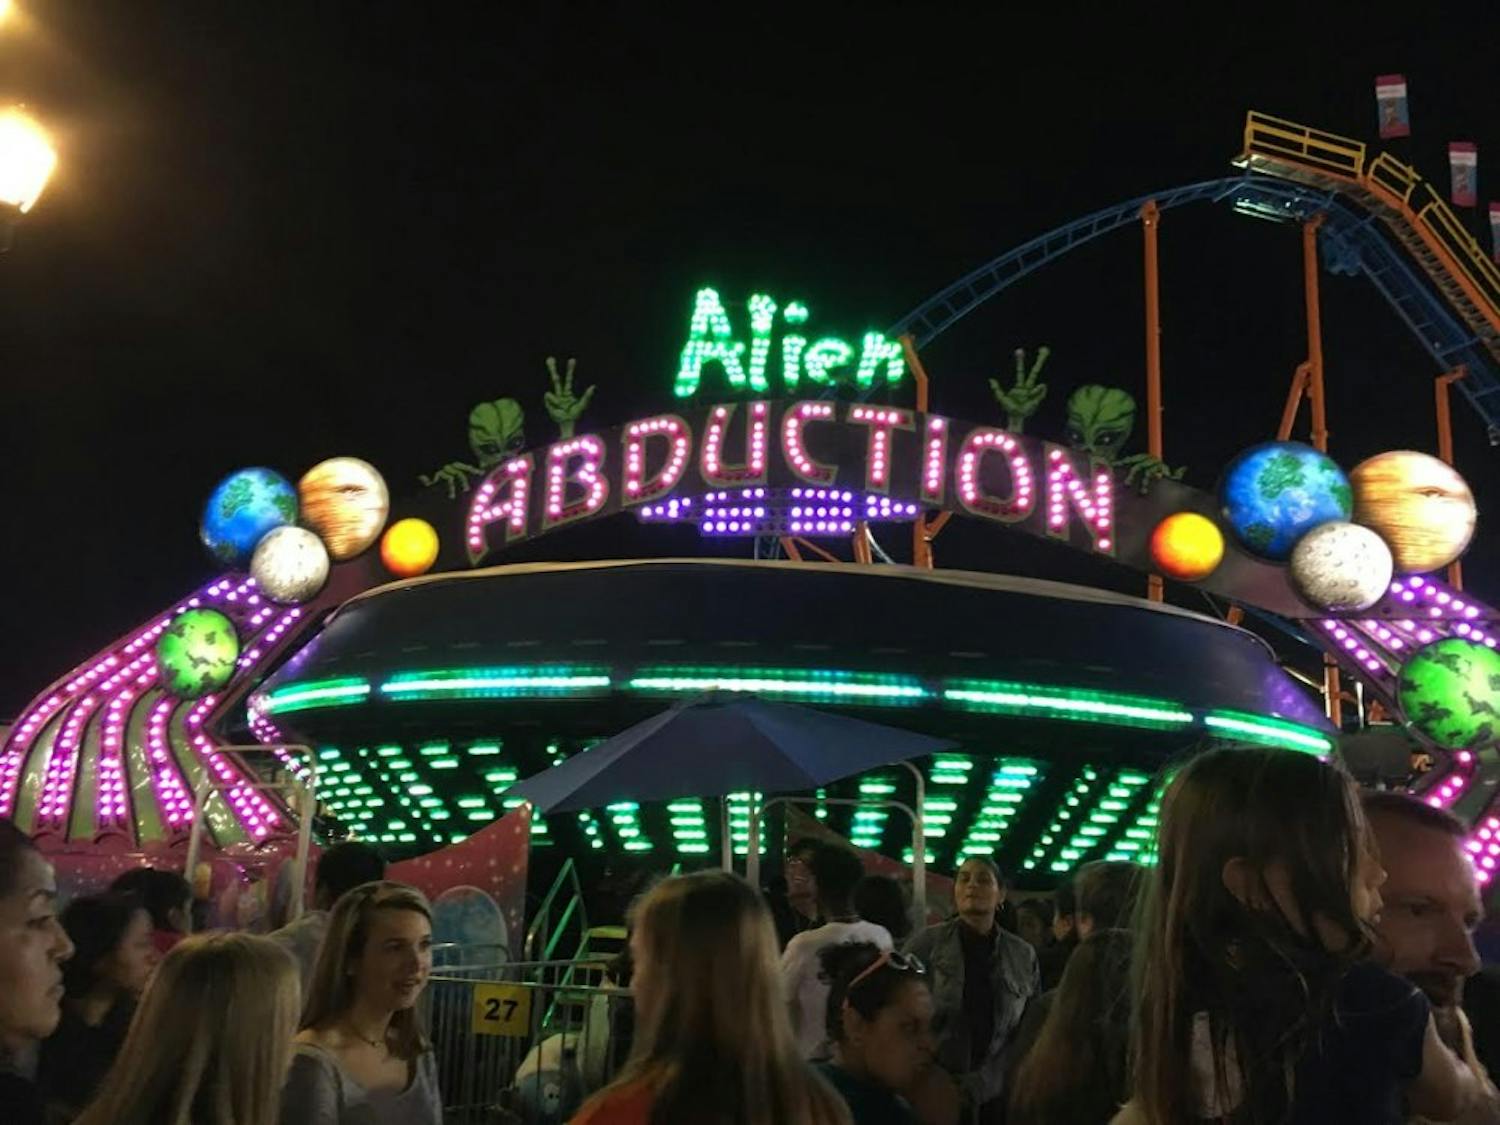 Alien Abduction is one of many attractions at the NC State Fair.